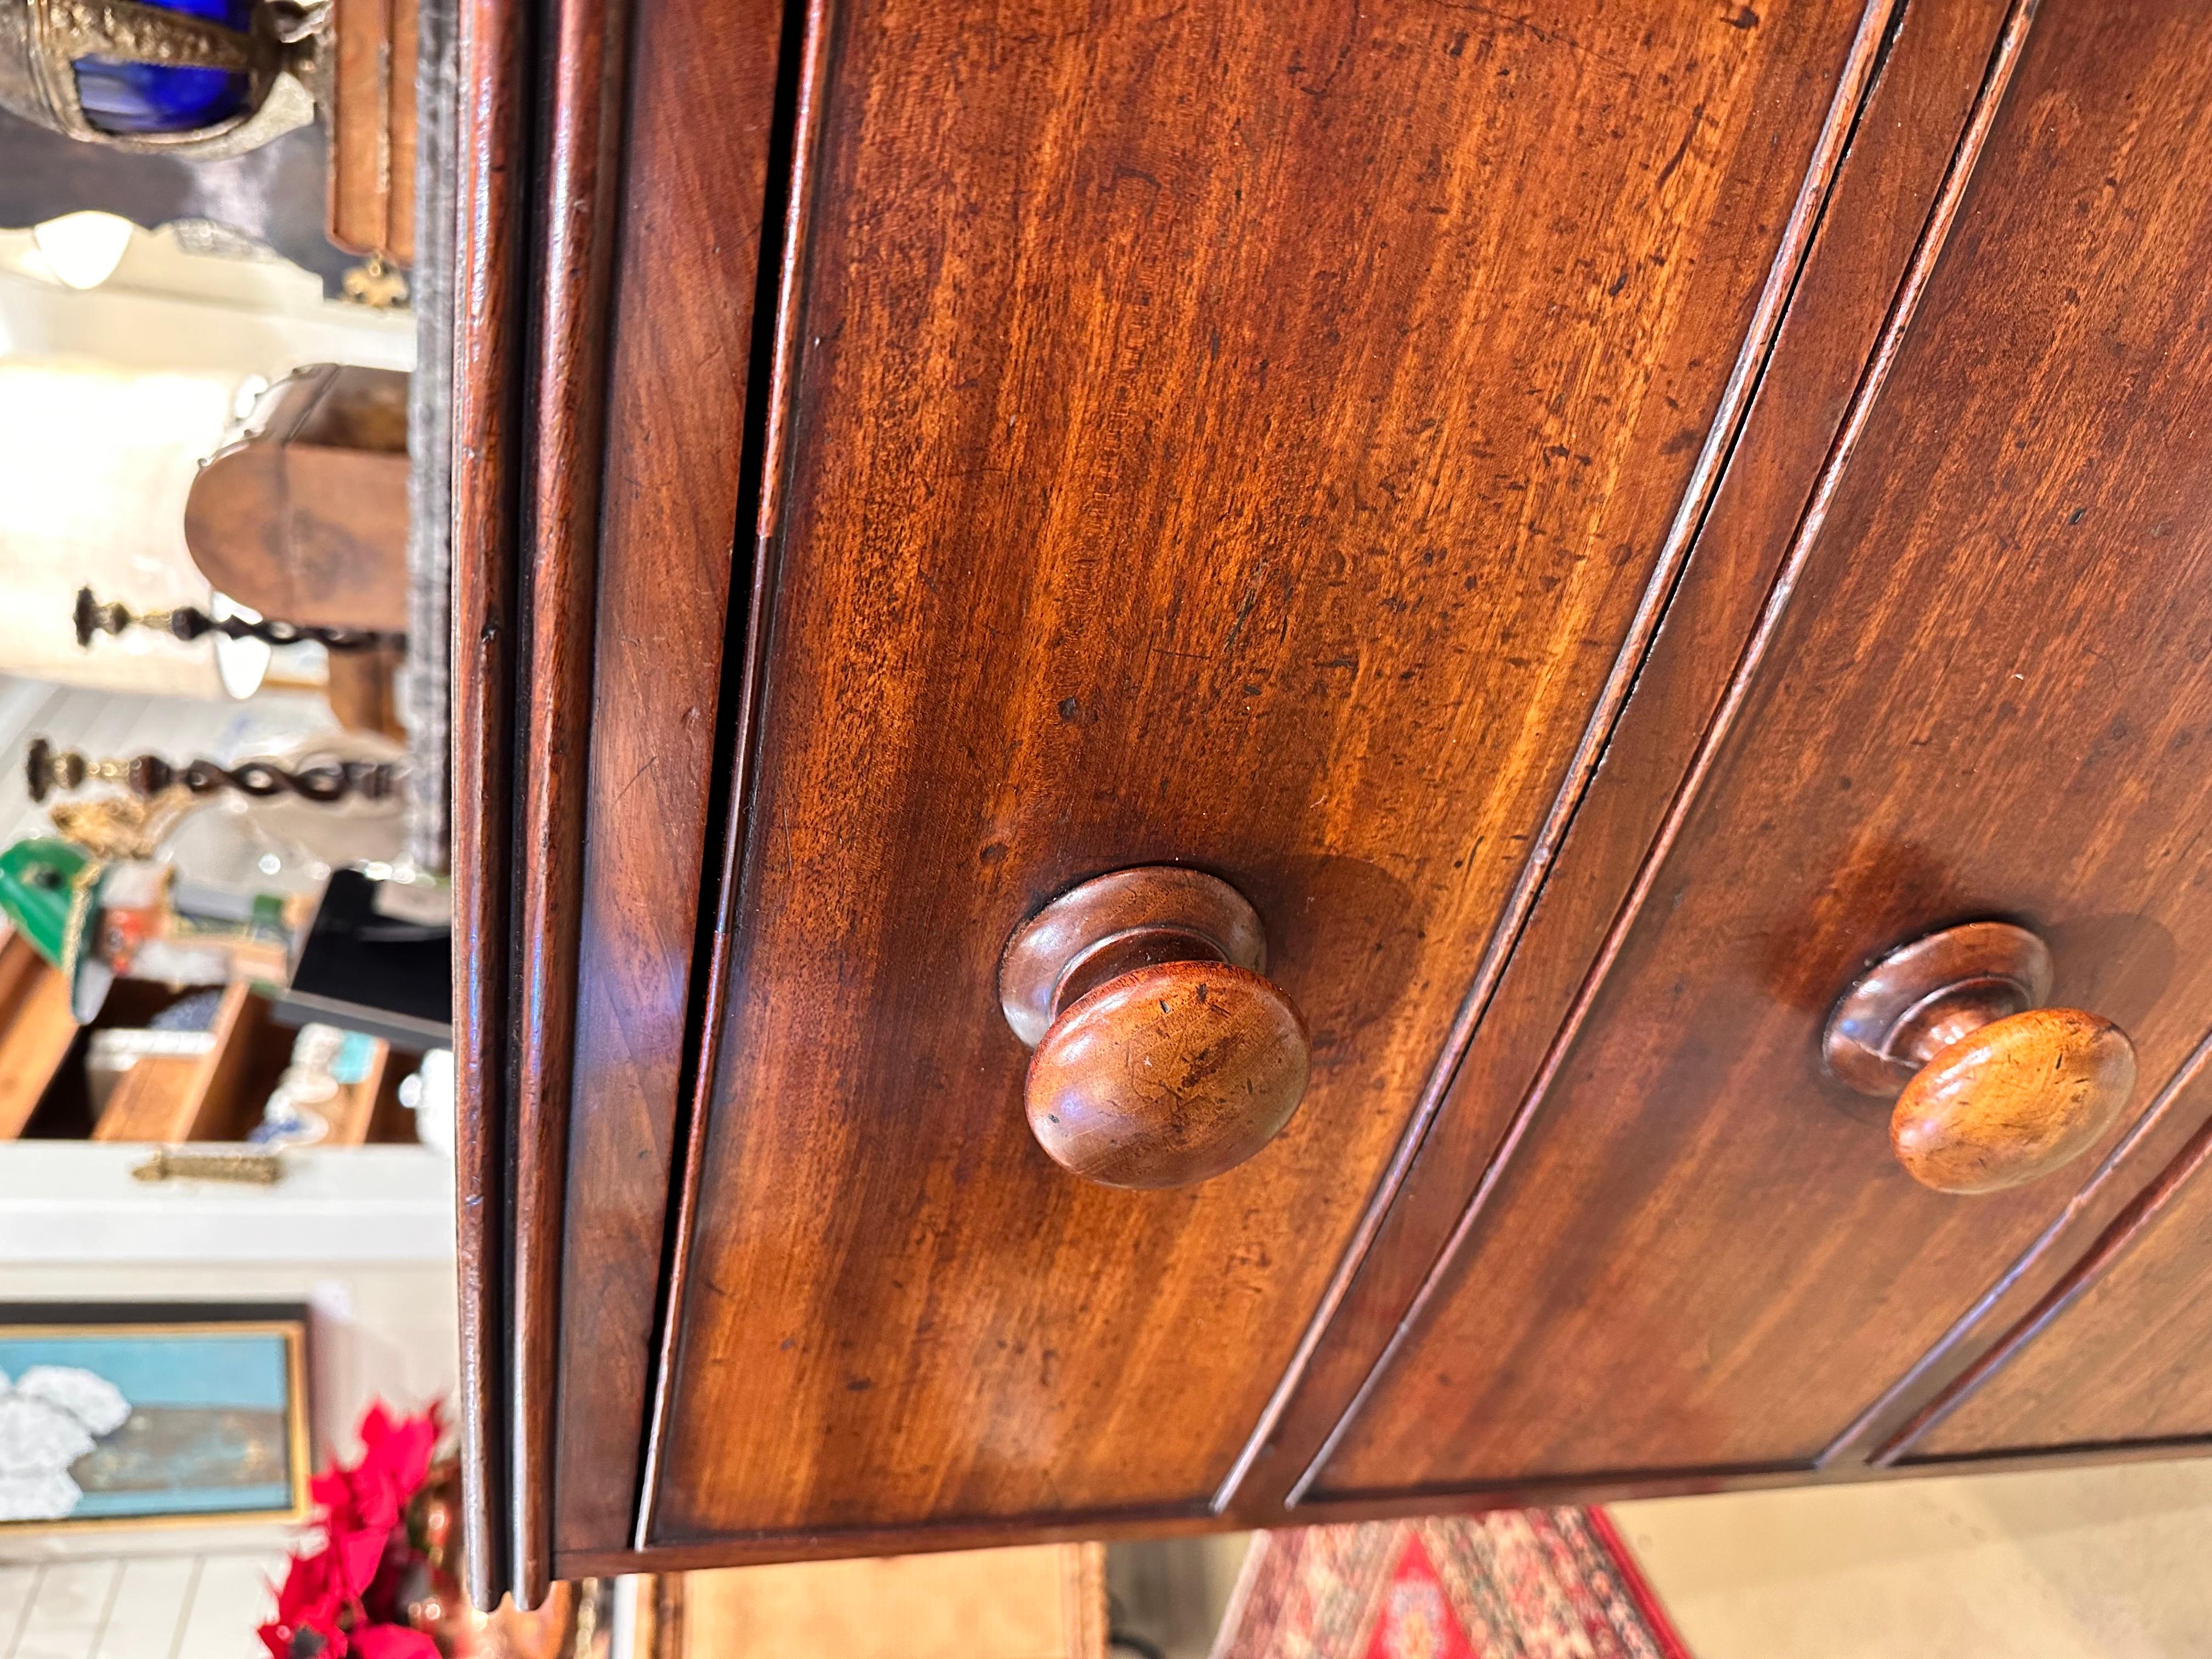 This is a beautiful little English bowfront chest! This piece has a very simple design without lacking elegance. The wood is dark and glossy, with beautiful patina and natural detail showing in the top and front. The wooden knobs maintain the simple